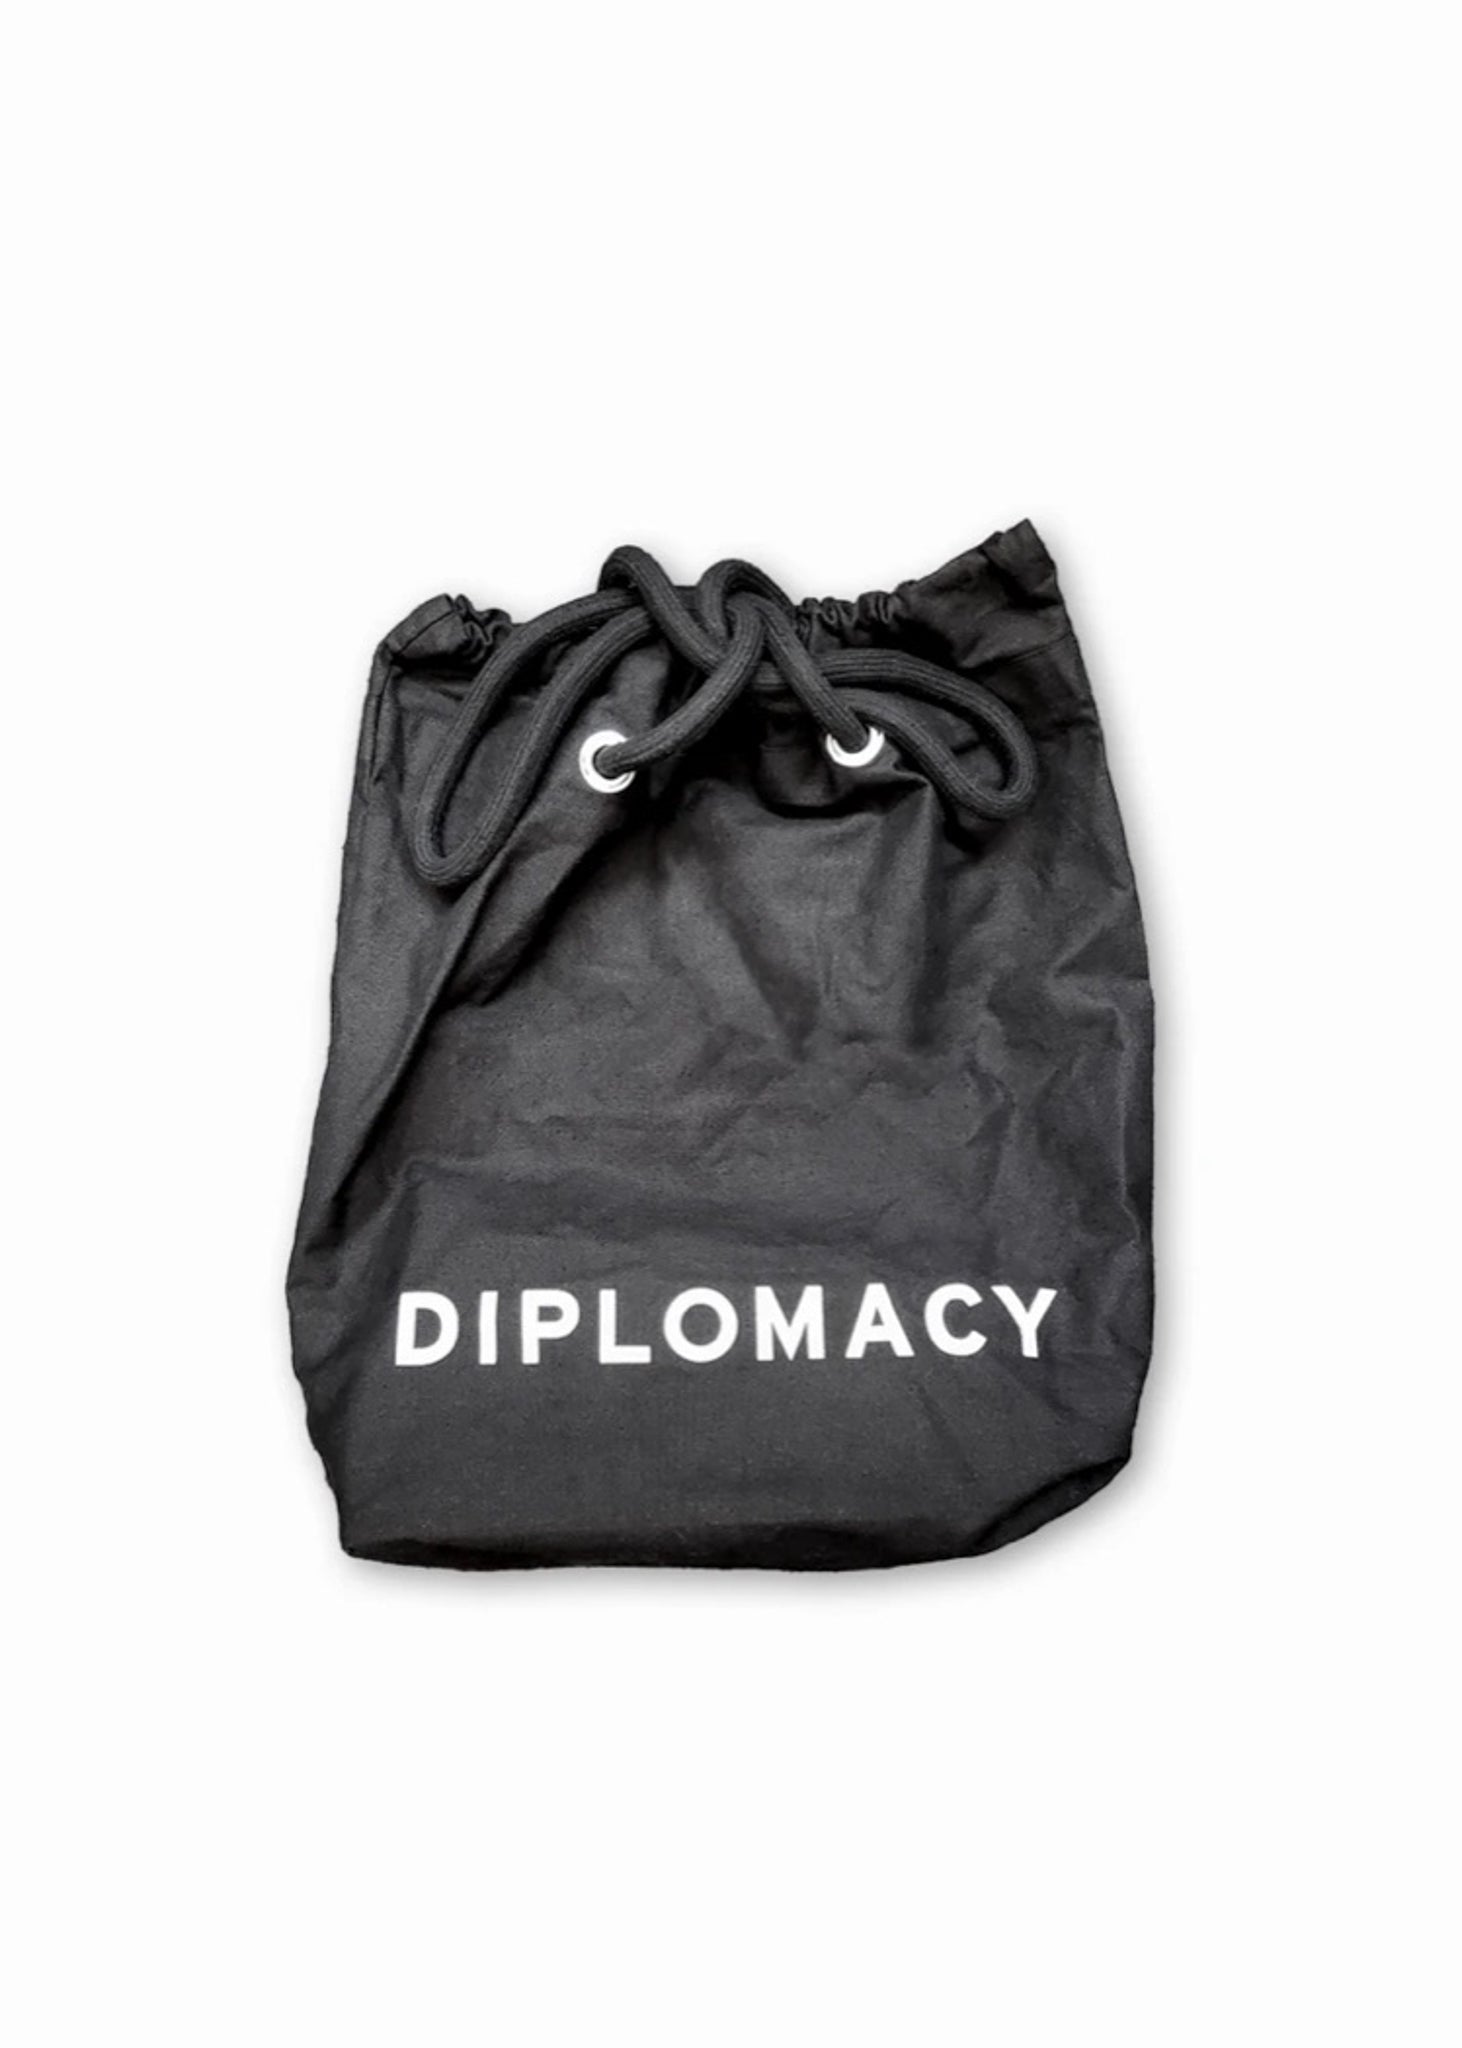 diplomacy canvas tote